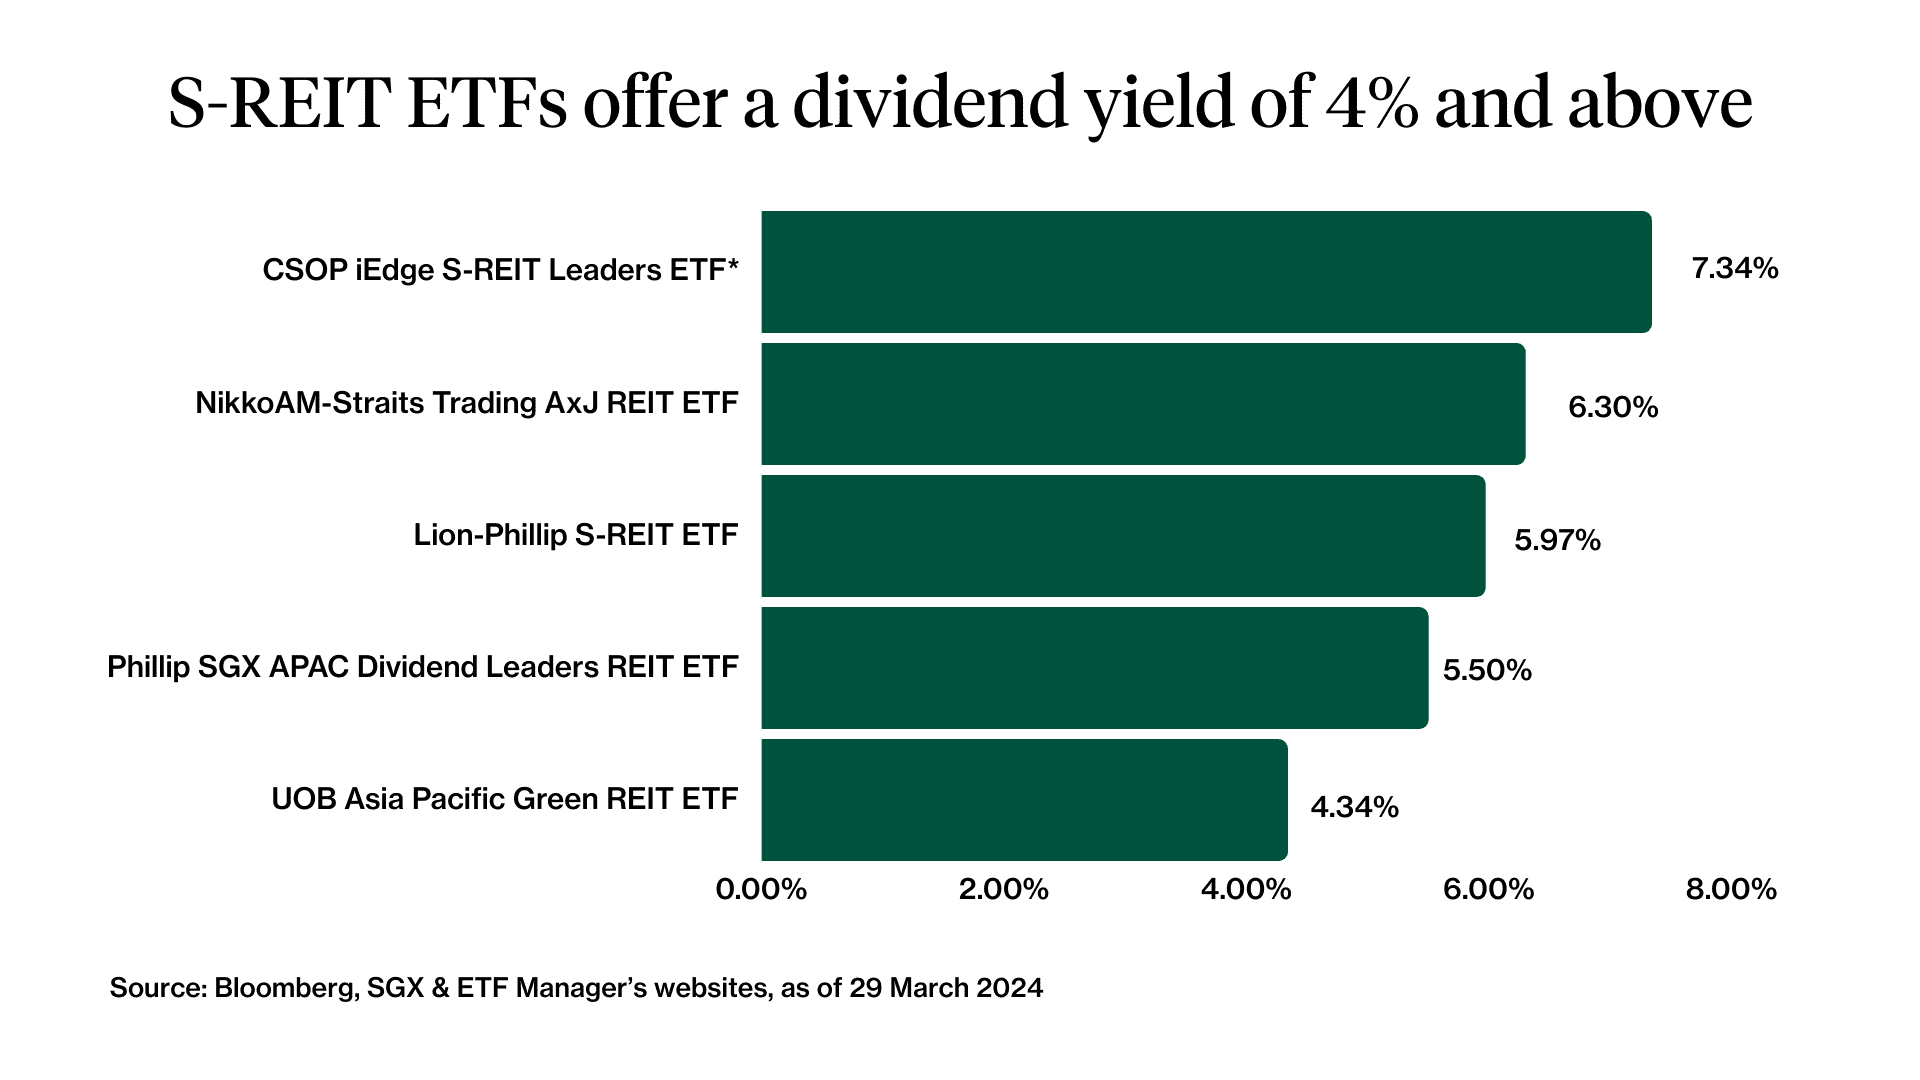 singapore reit etf dividend yield may 2024